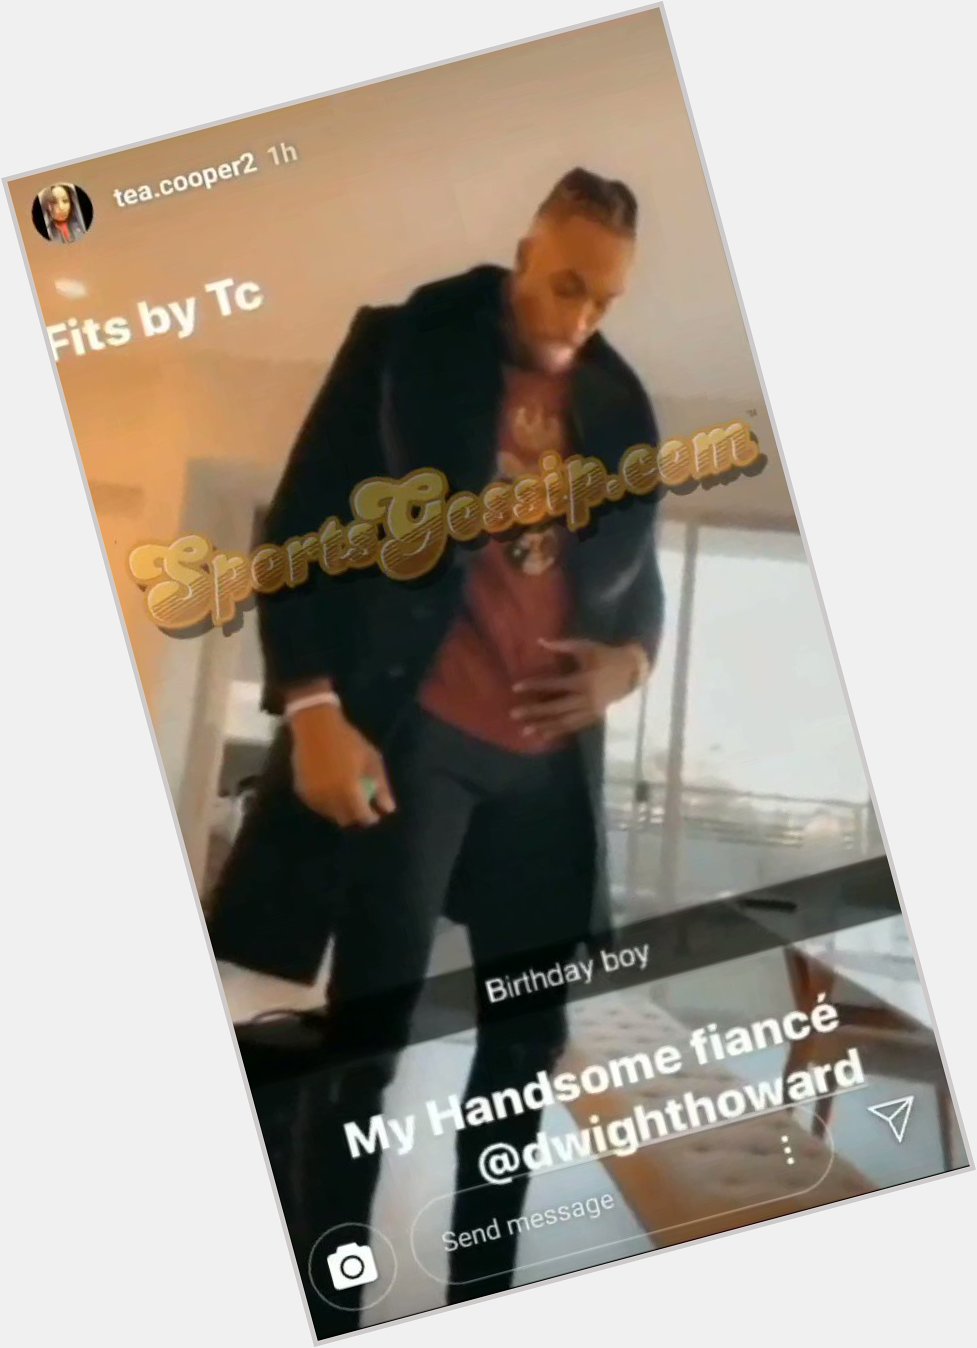 Dwight Howard gets dressed by his fiancee 